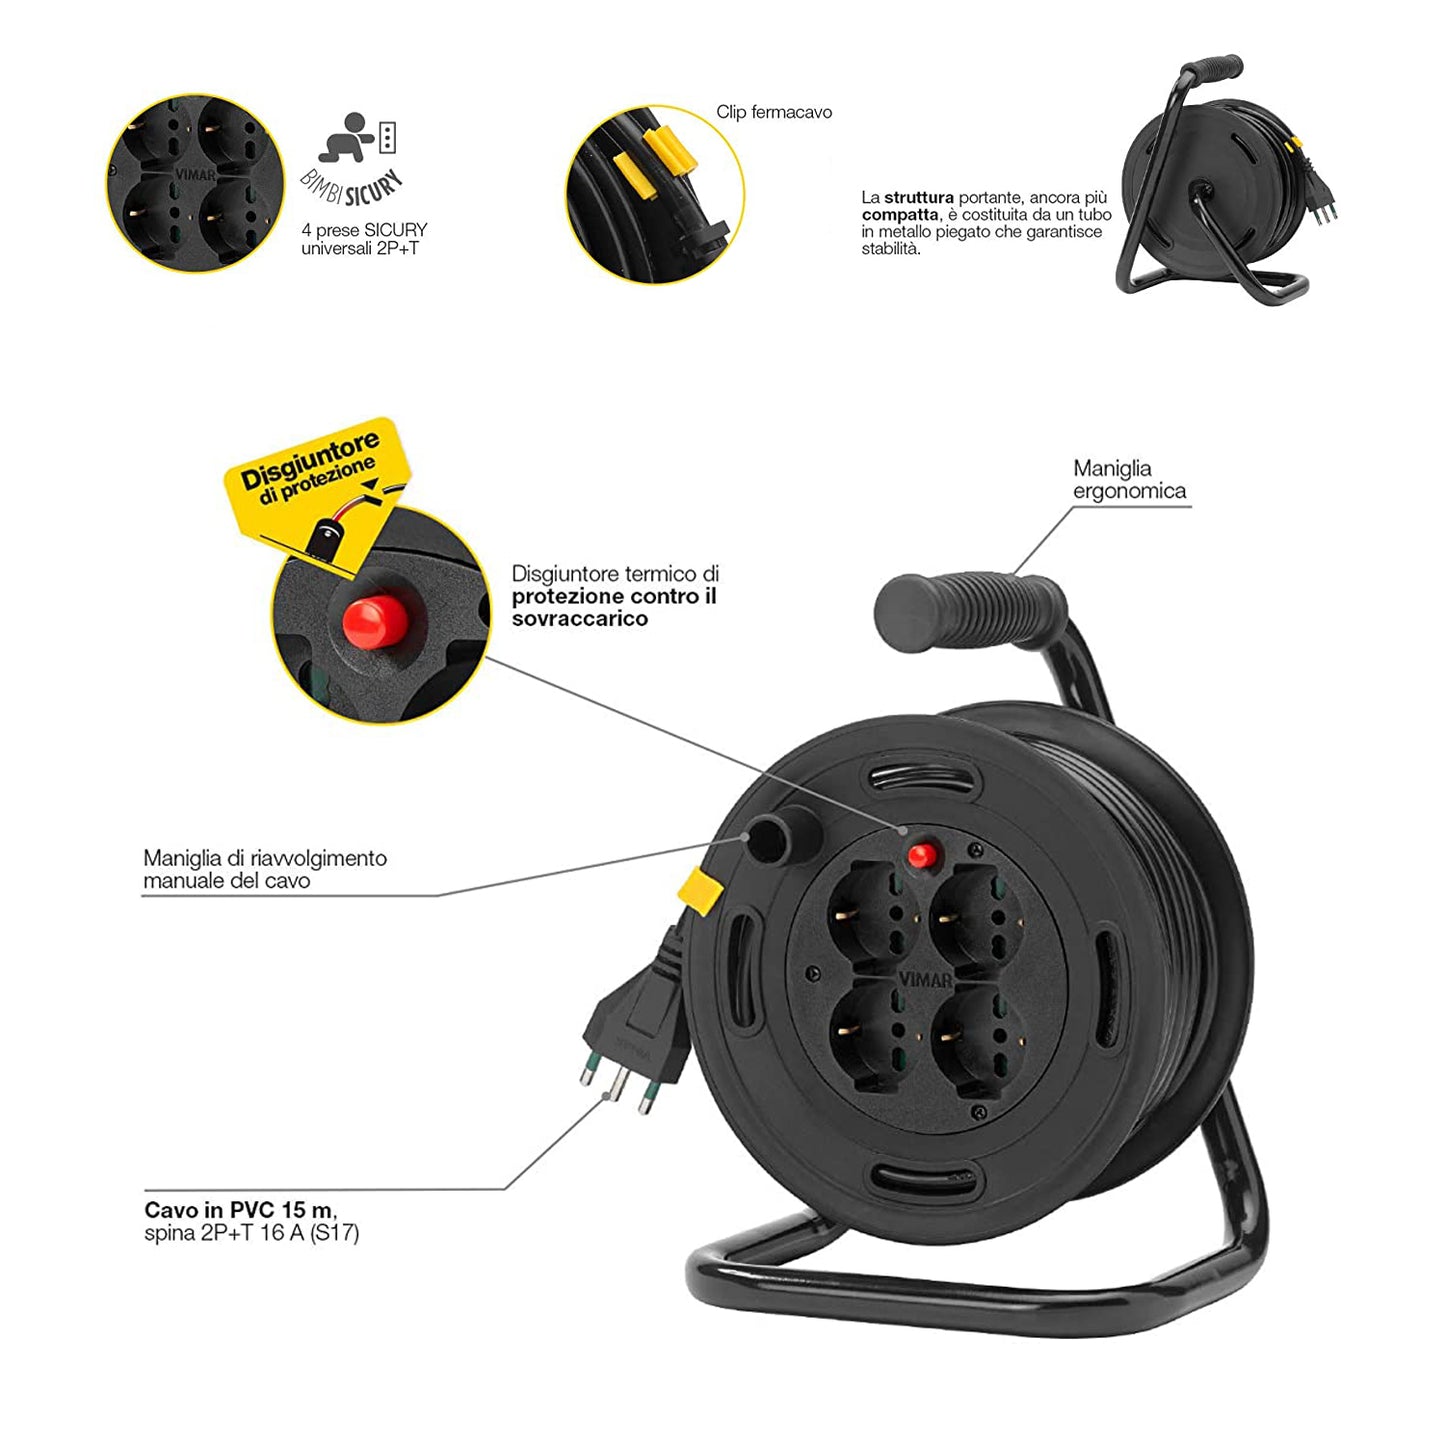 VIMAR Cable reel 16A 230V, with S17 2P+T plug and 4 P40 type universal sockets, 15m long cable, thermal circuit breaker for protection against overload